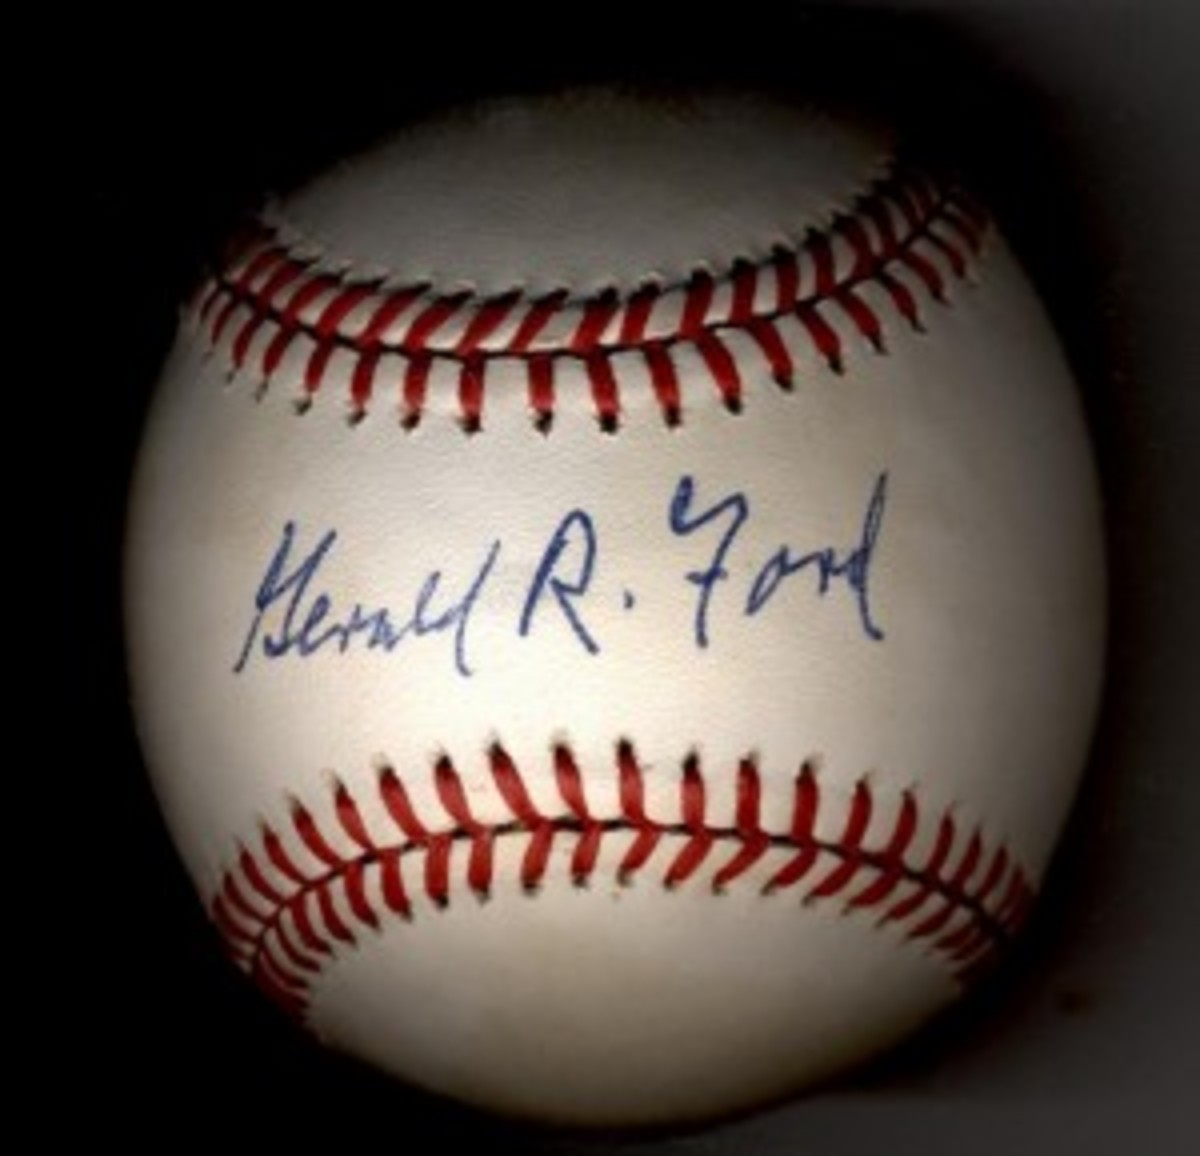 This is how a genuine Gerald Ford signature should look on a baseball.